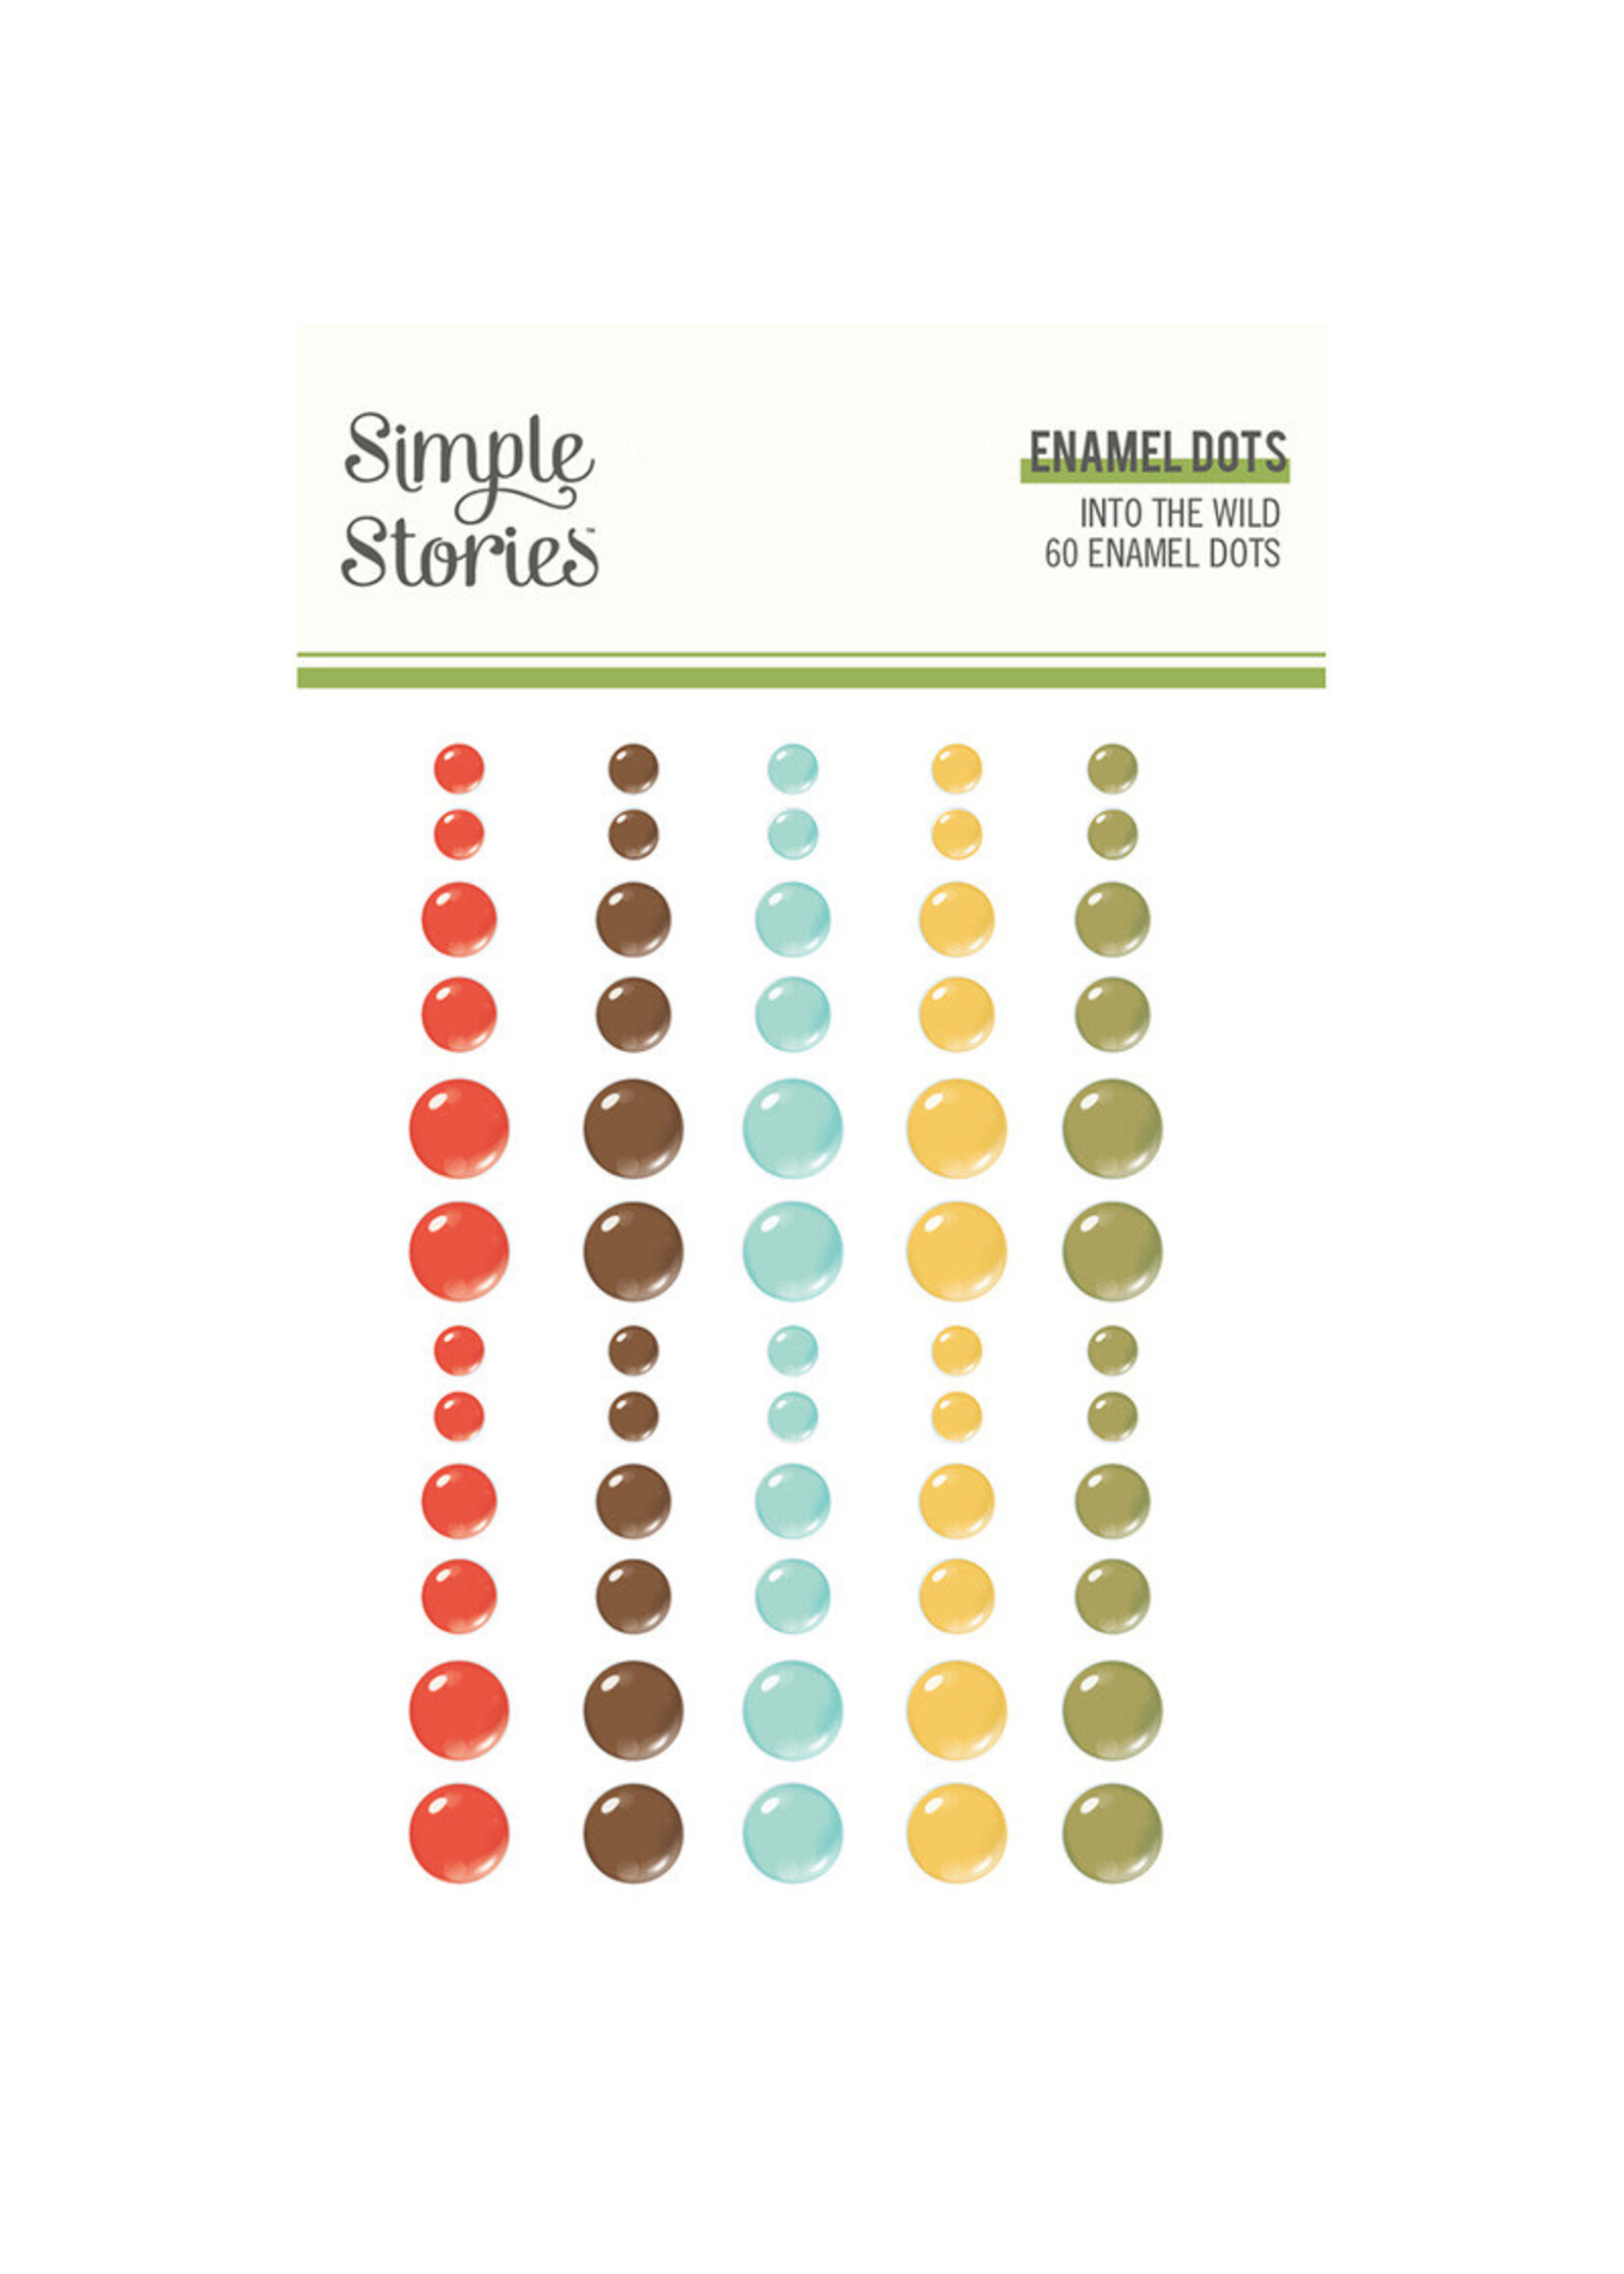 Simple Stories Simple Stories Enamel Dots, Into the Wild